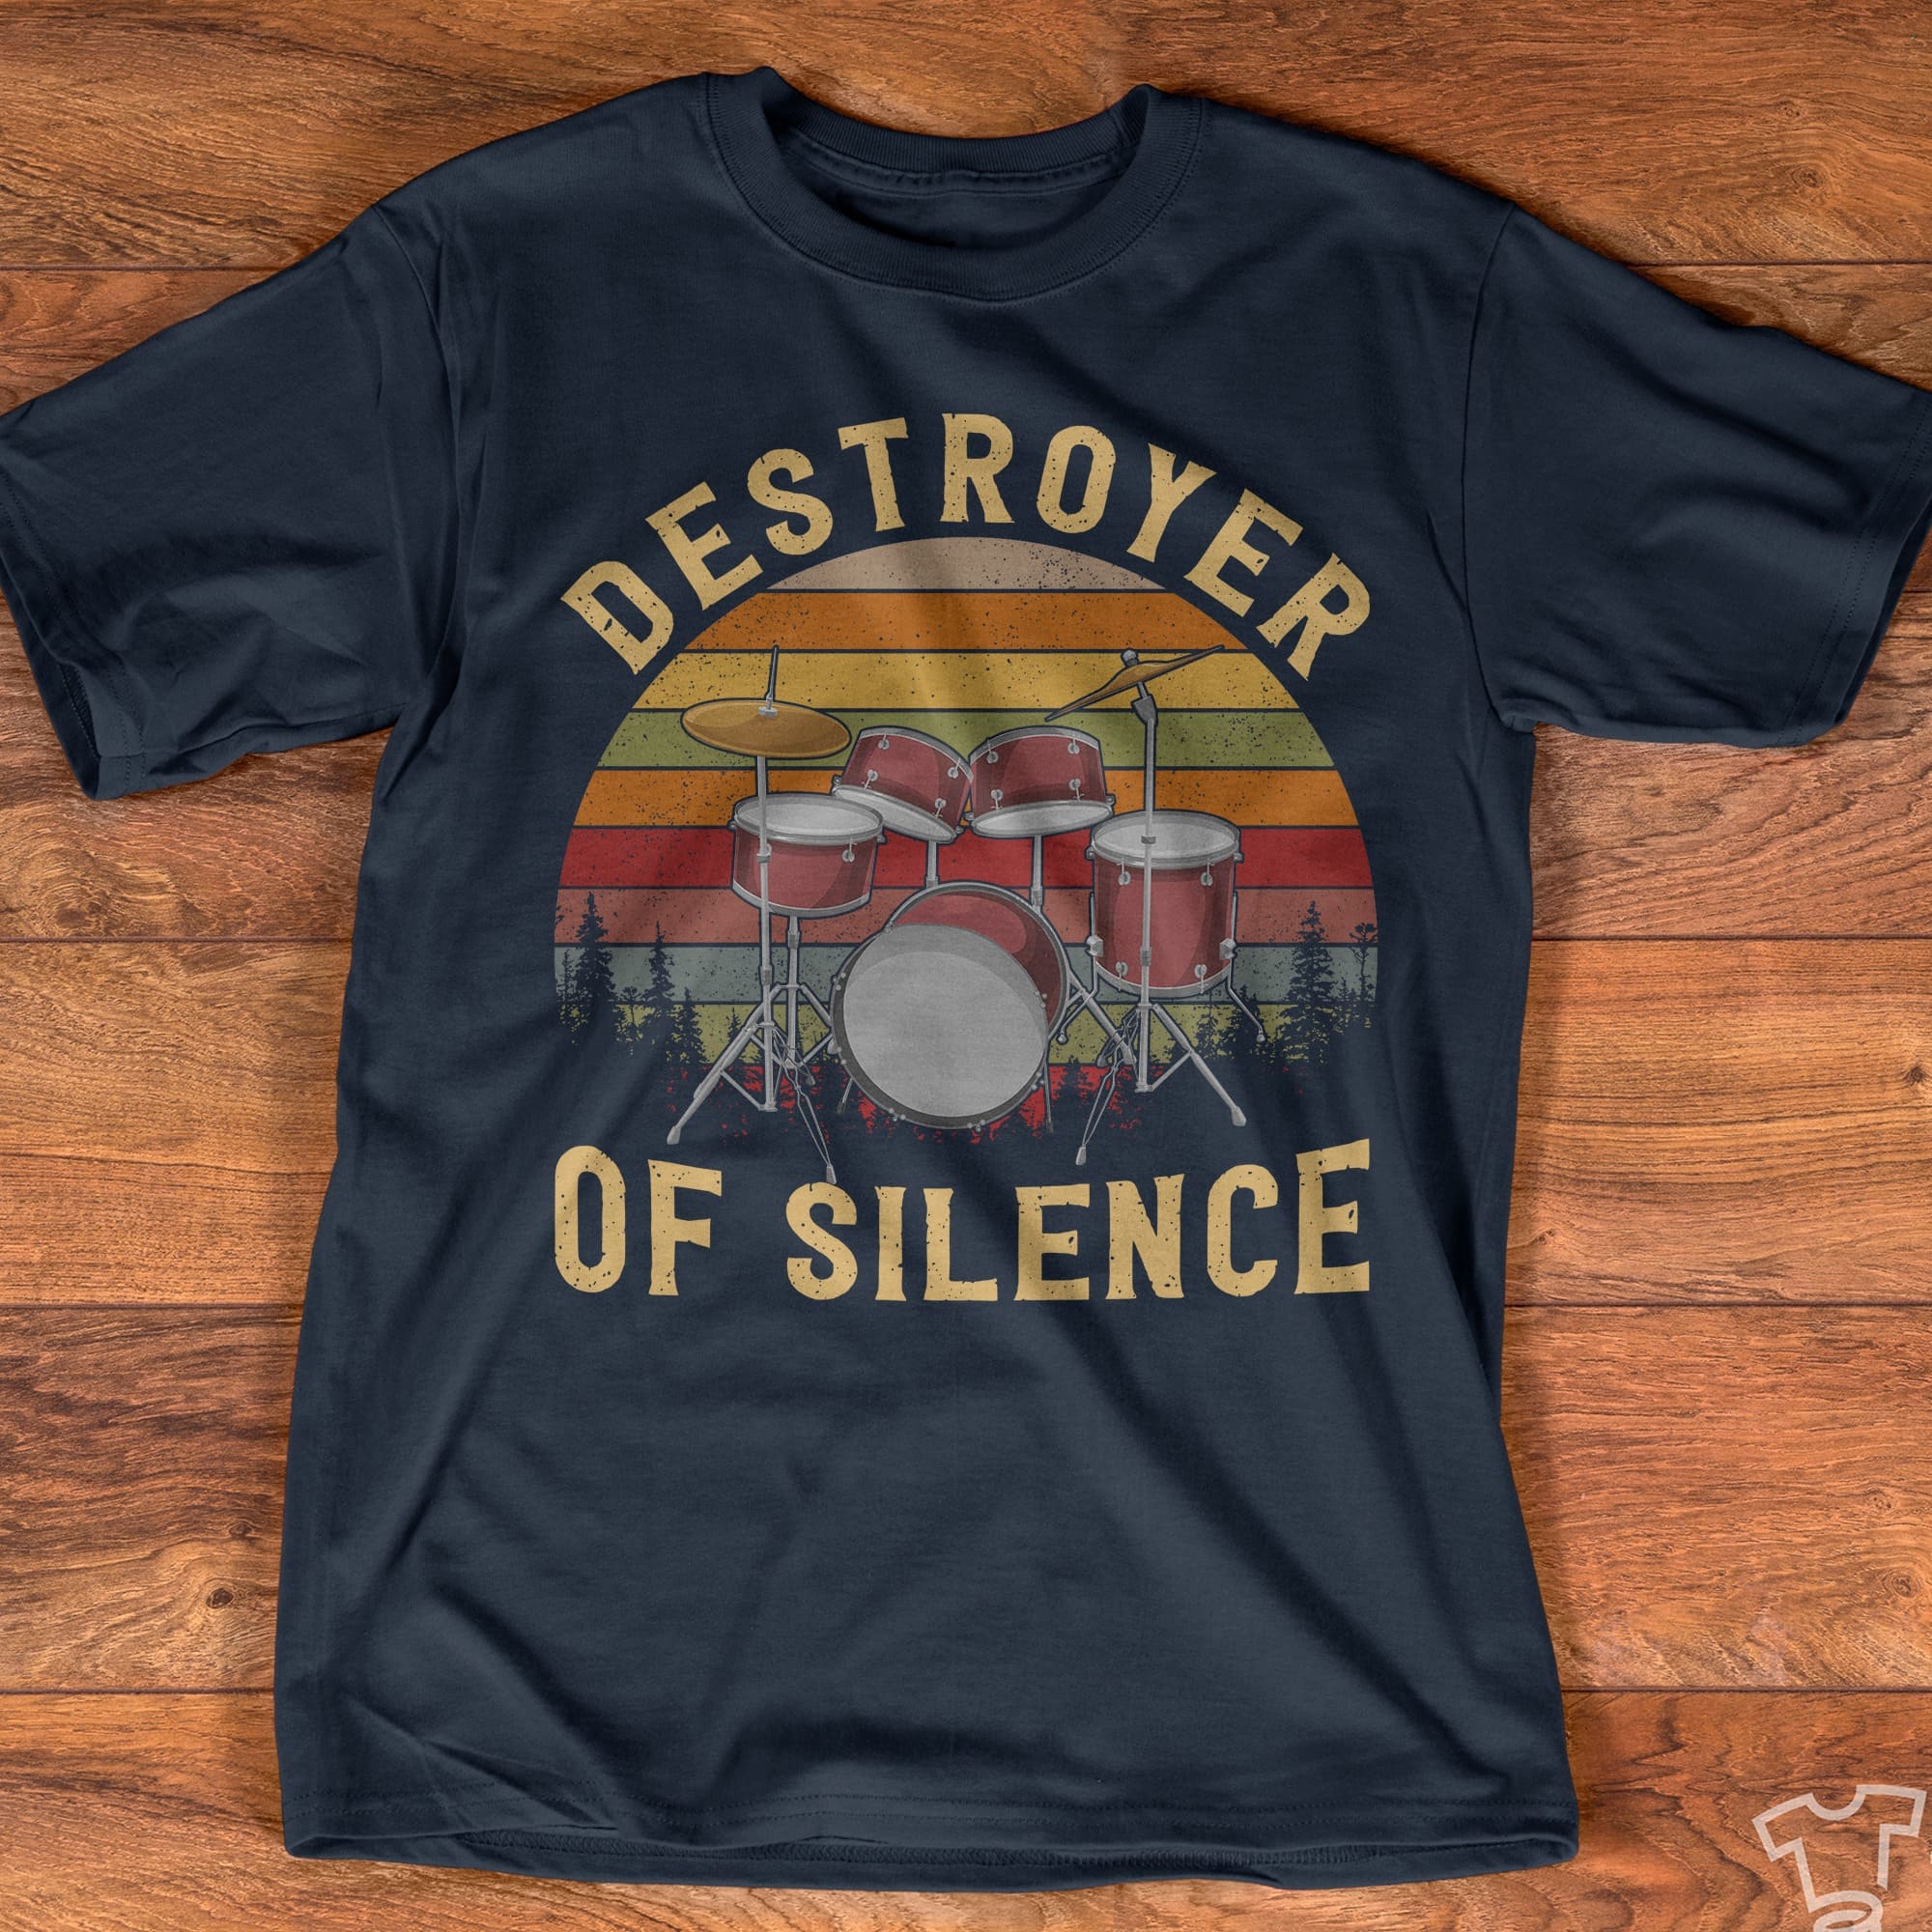 Drums Graphic T-shirt - Destroyer of silence